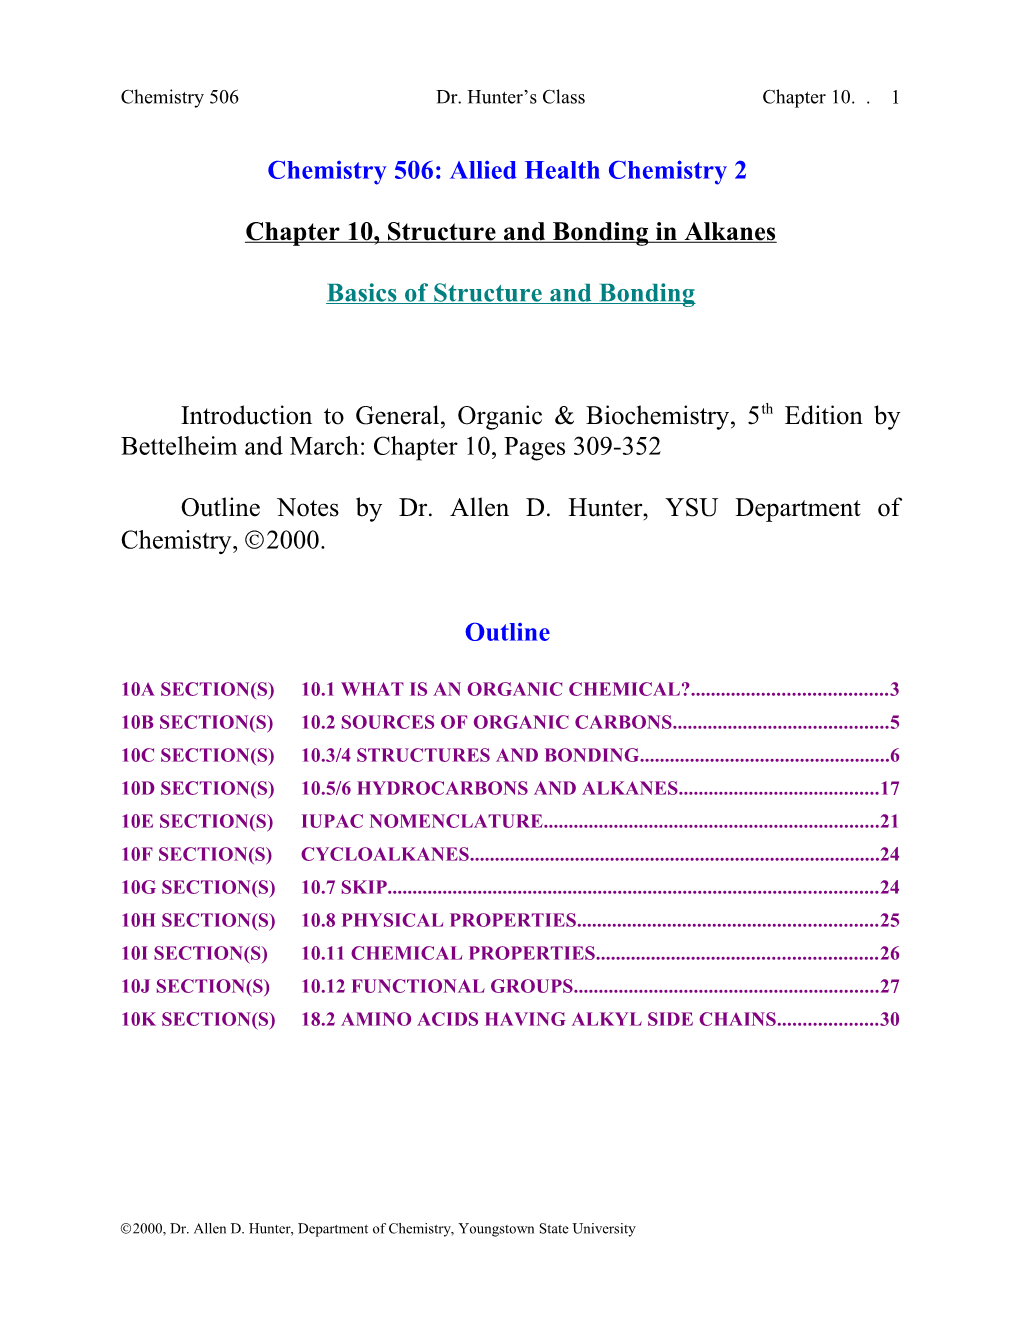 Chapter 10, Structure and Bonding in Alkanes